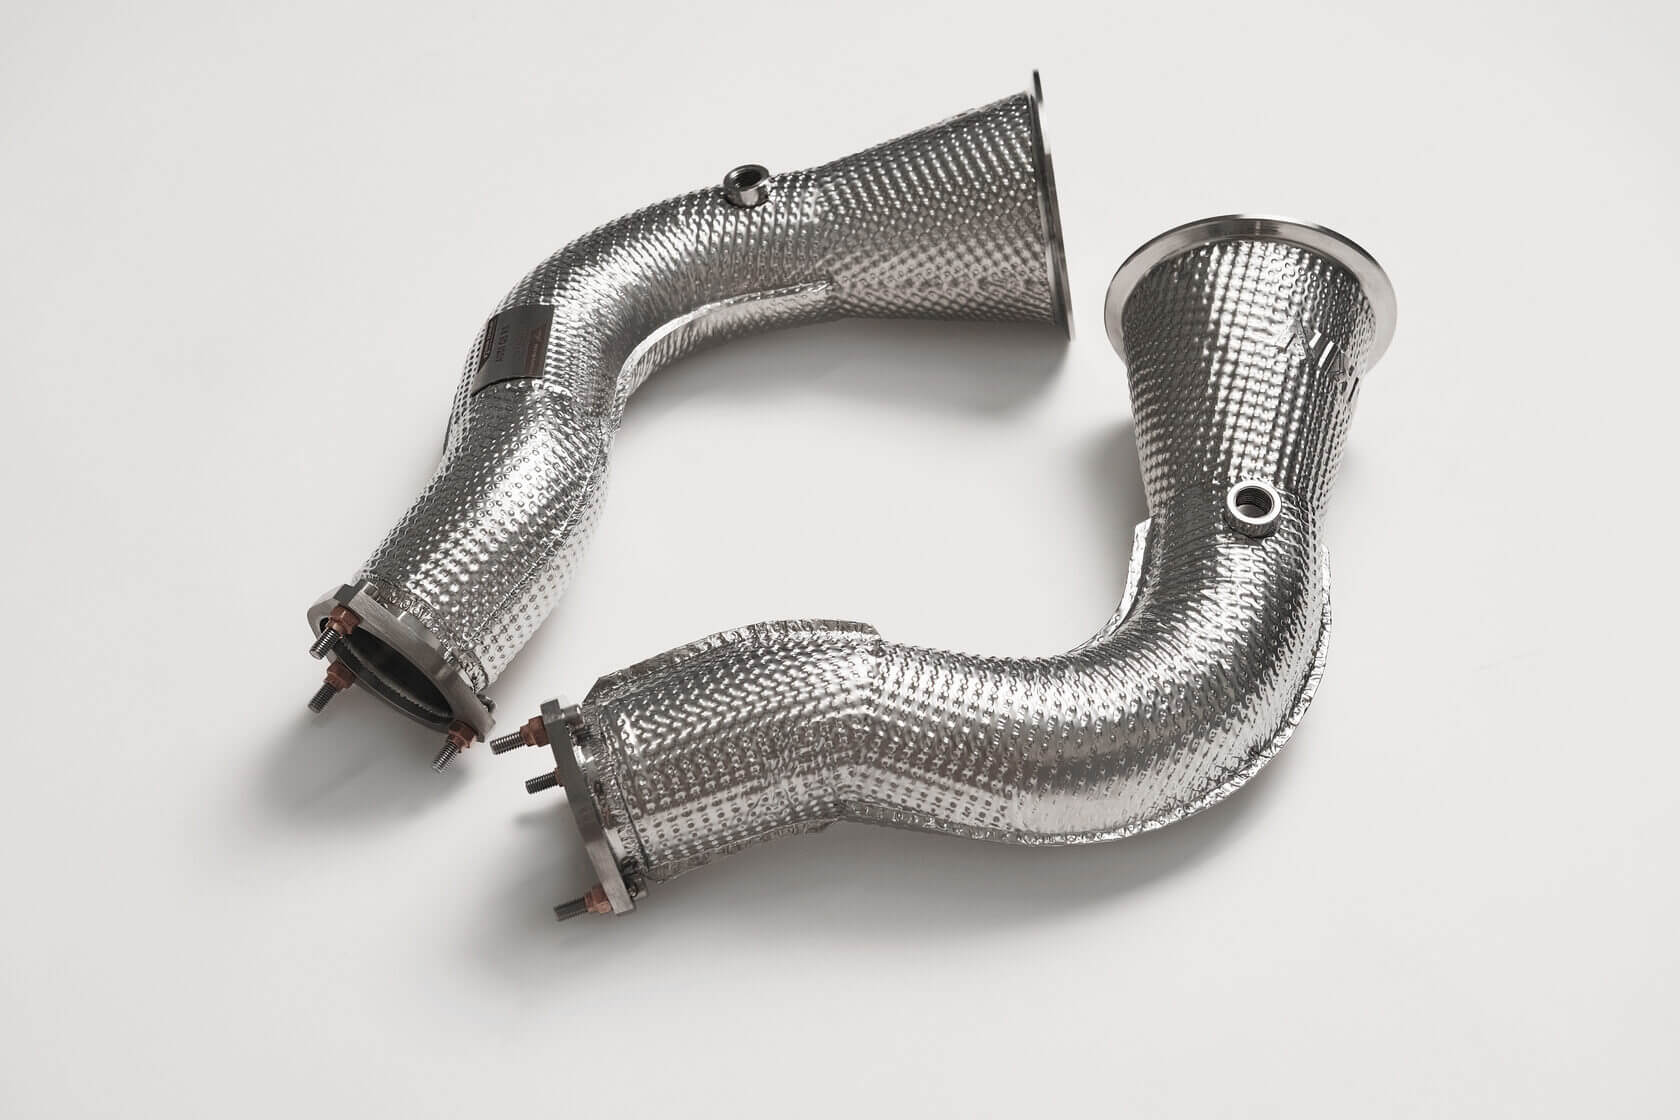 DEIKIN 10-AUDI.RS.Q8-DP Downpipe for Audi RS Q8 without HeatShield Photo-2 